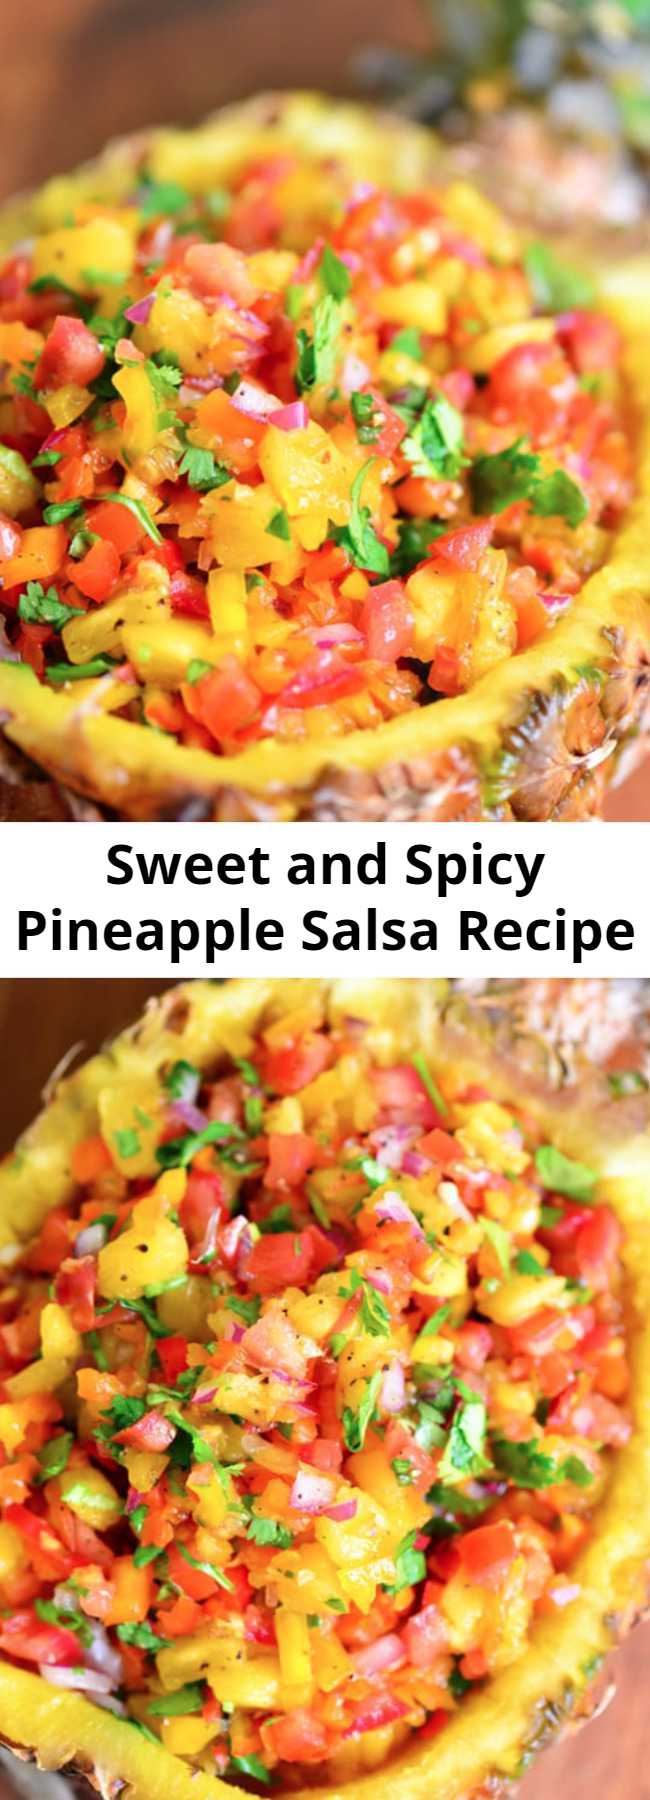 Sweet and Spicy Pineapple Salsa Recipe - This pineapple salsa recipe has a delicious combination of sweet and spicy. It can be served with grilled chicken or fish or as an appetizer with chips.